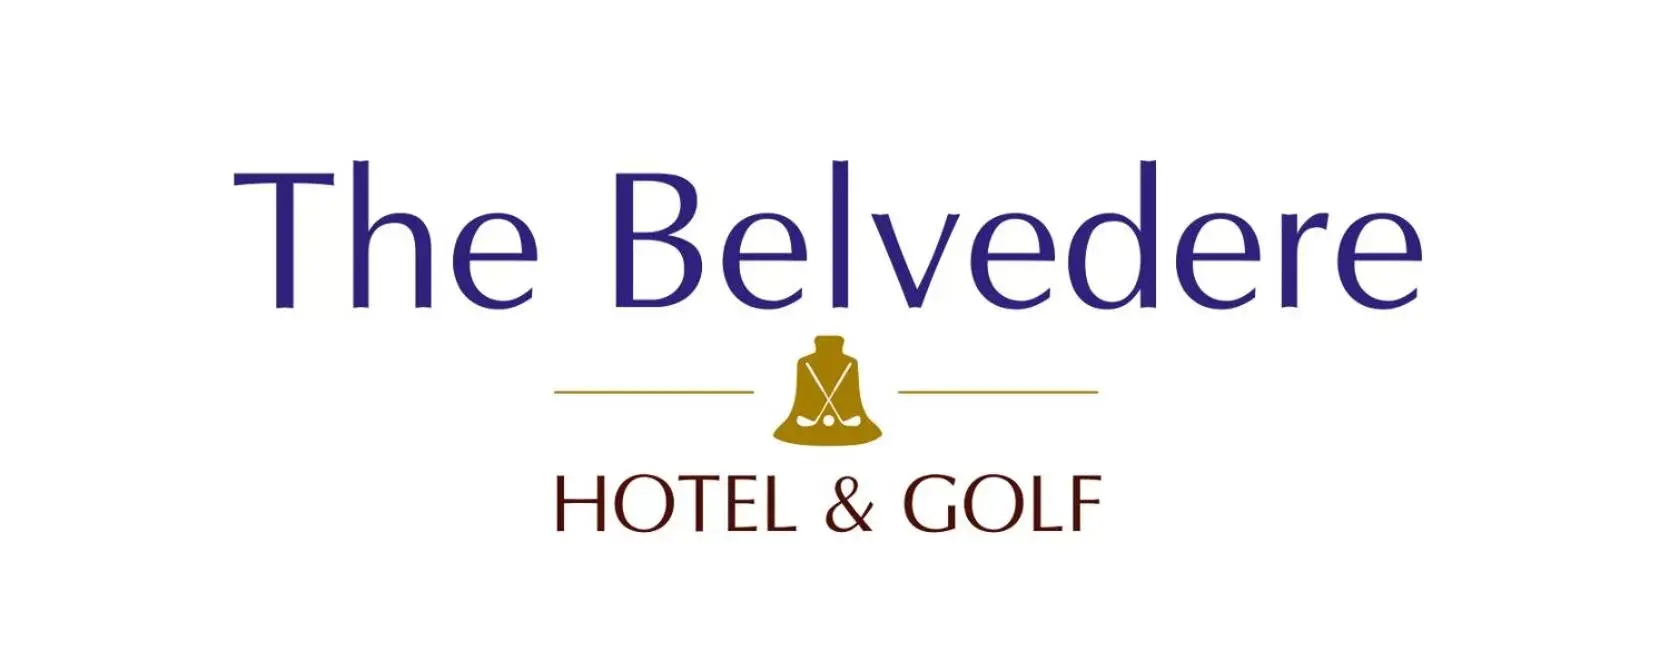 Property Logo/Sign in Belvedere Hotel and Golf